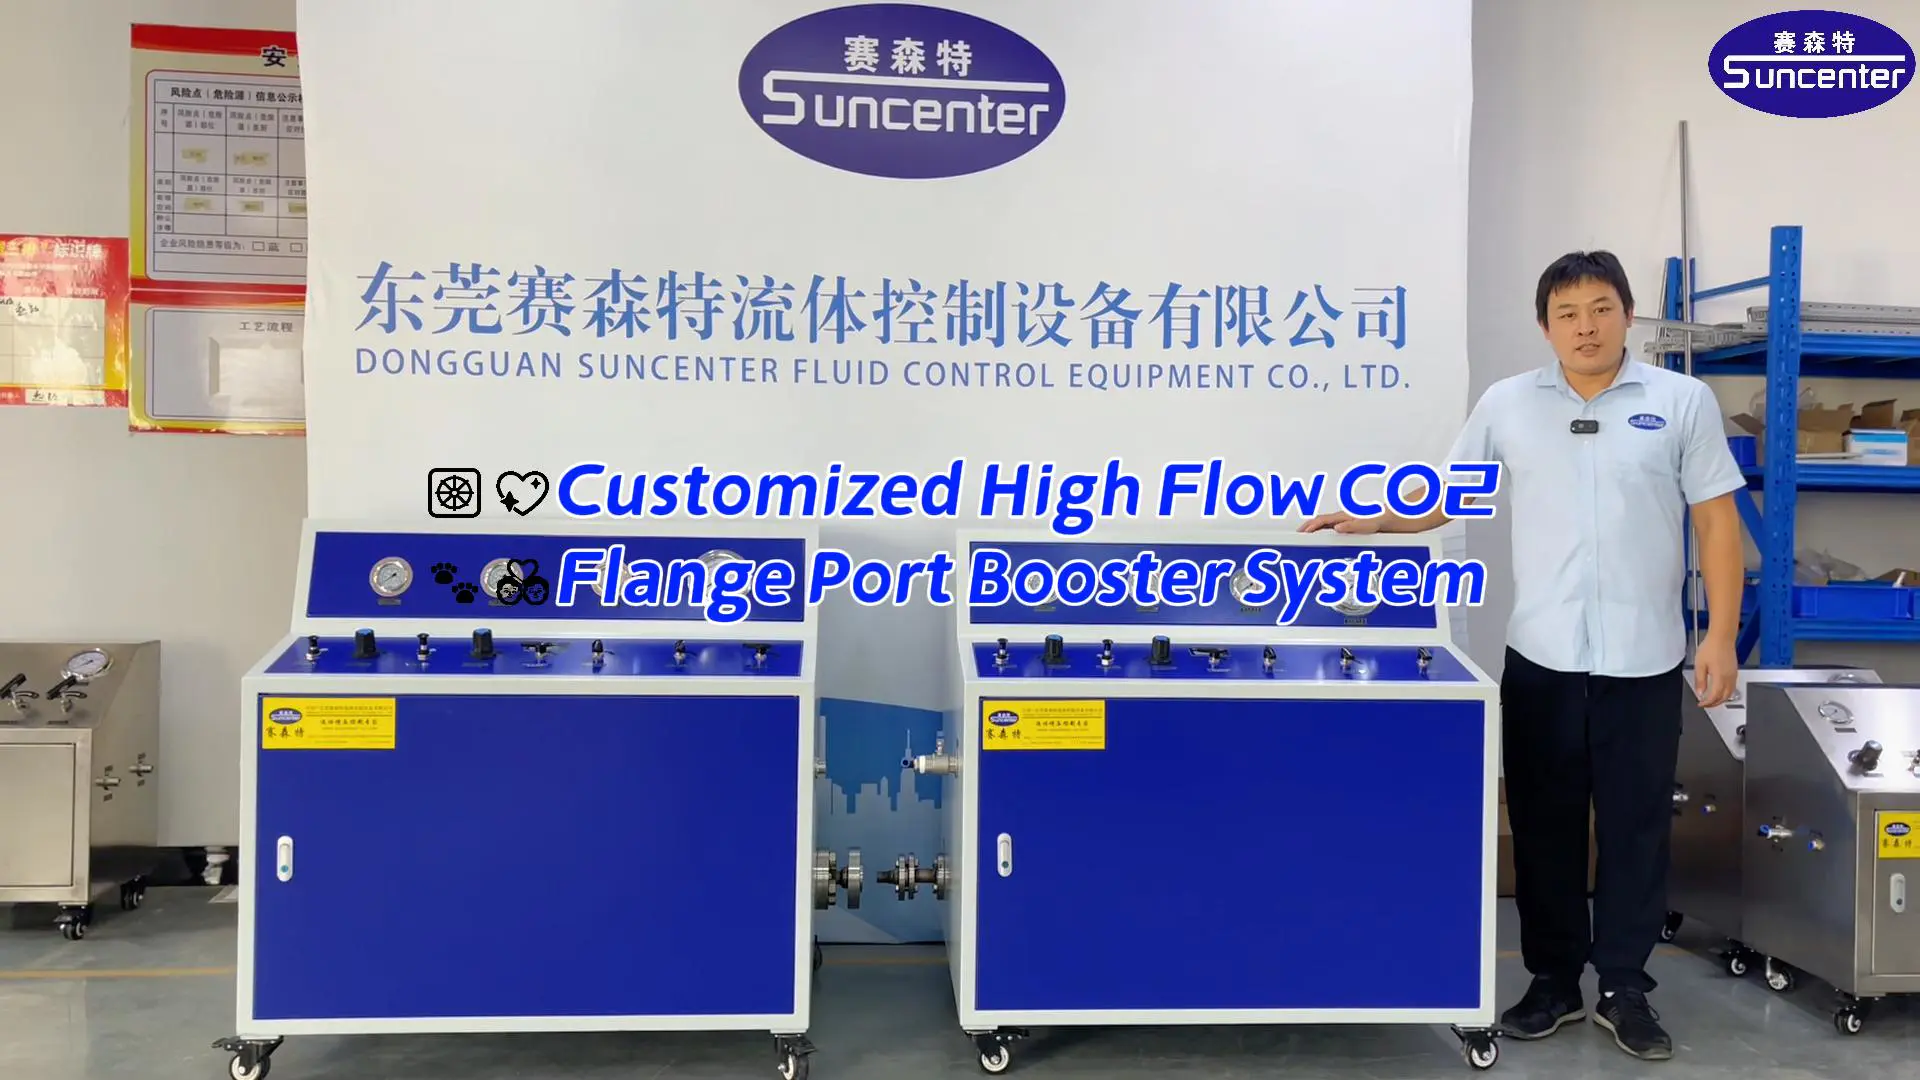 Customized High Flow CO2 Flange Port Booster System